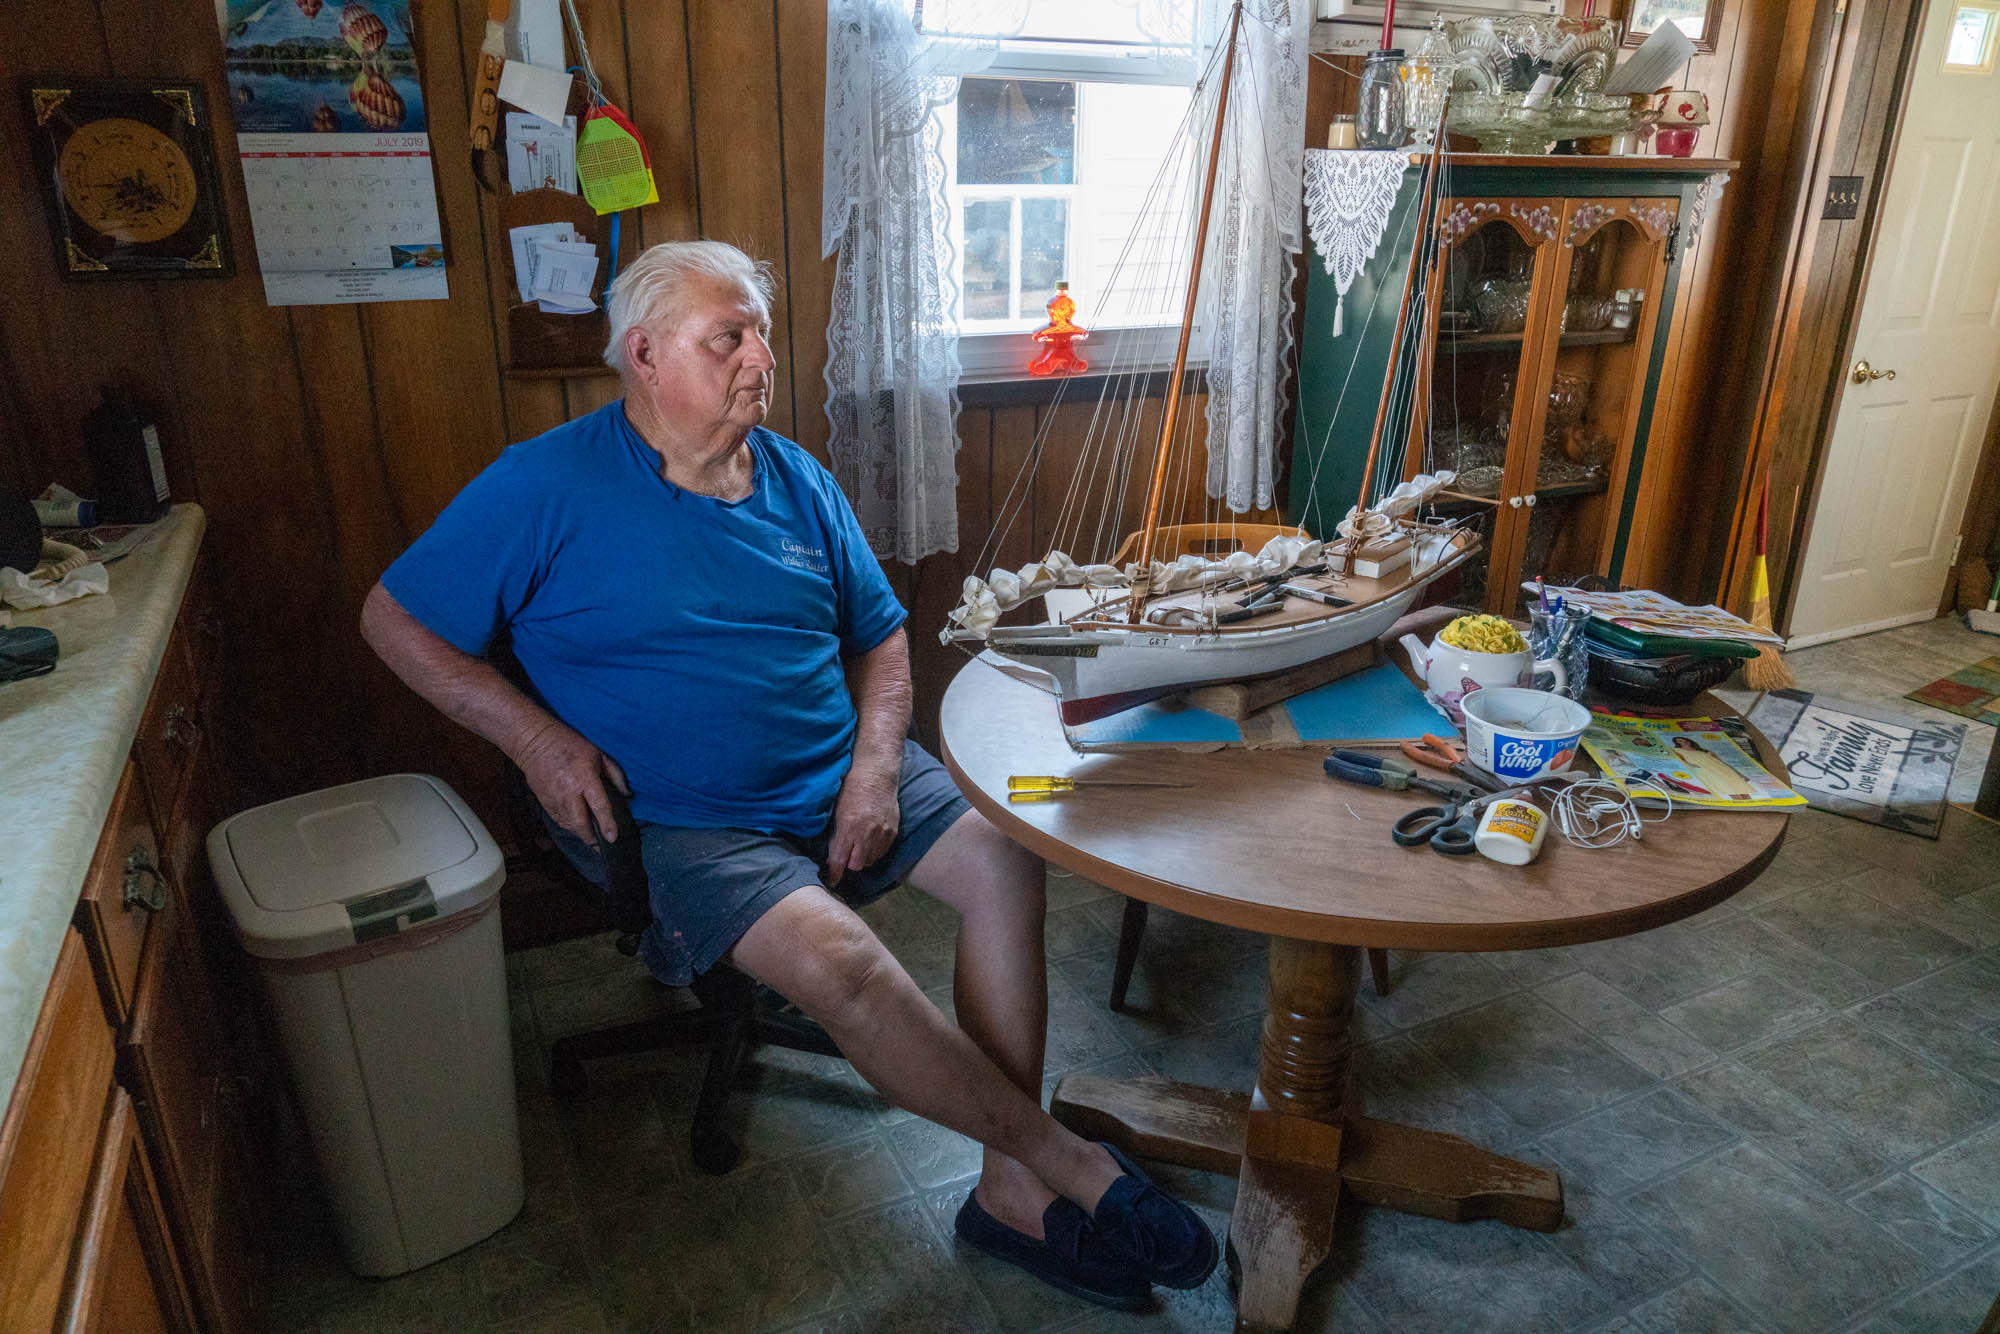 Wesley Bradshaw, a lifelong resident of Smith Island, Maryland, believes the climate is changing but he discounts its role in rising sea levels in Chesapeake Bay. (Jordan Laird/News21)